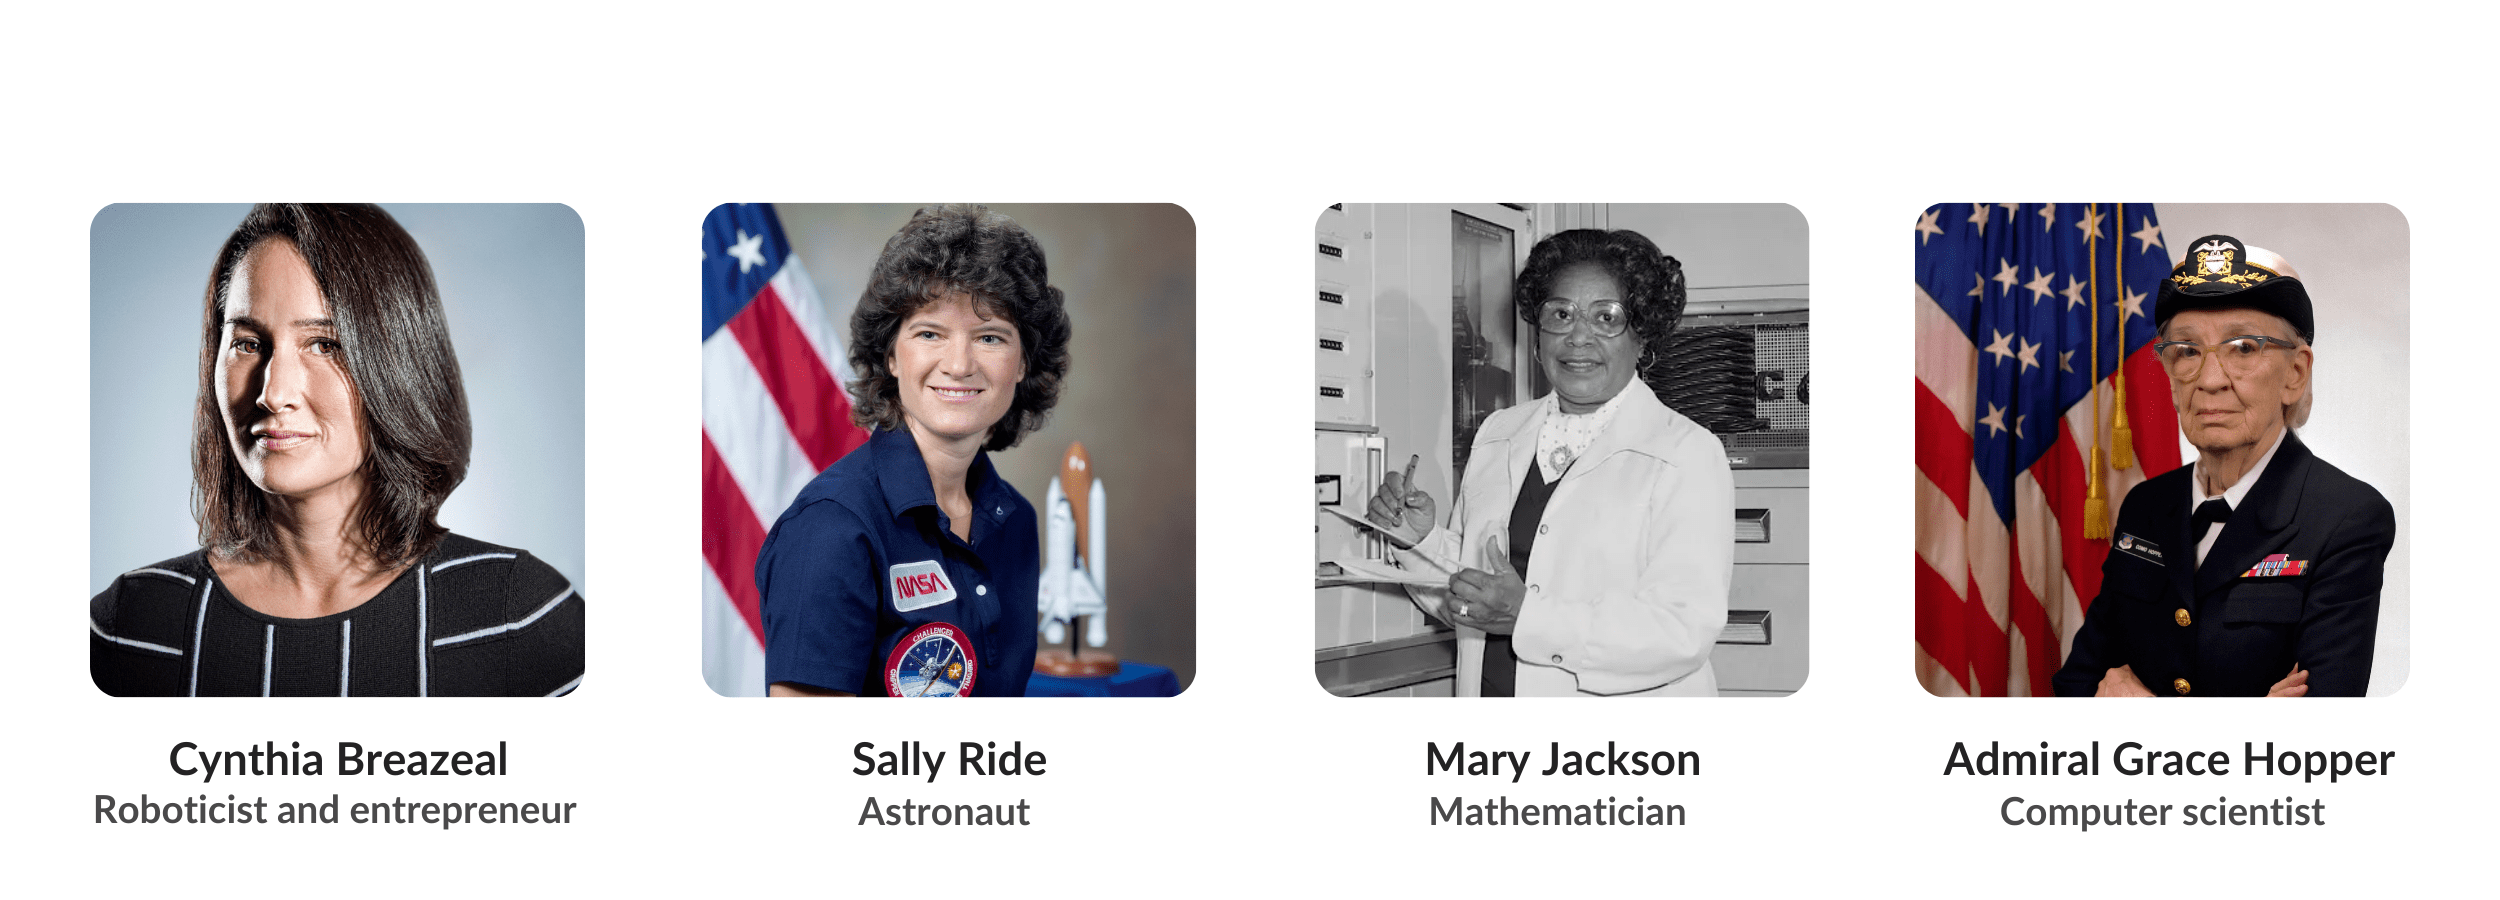 STEAM heroins - Cynthia Breazeal, Sally Ride, Mary Jackson and Admiral Grace Hopper